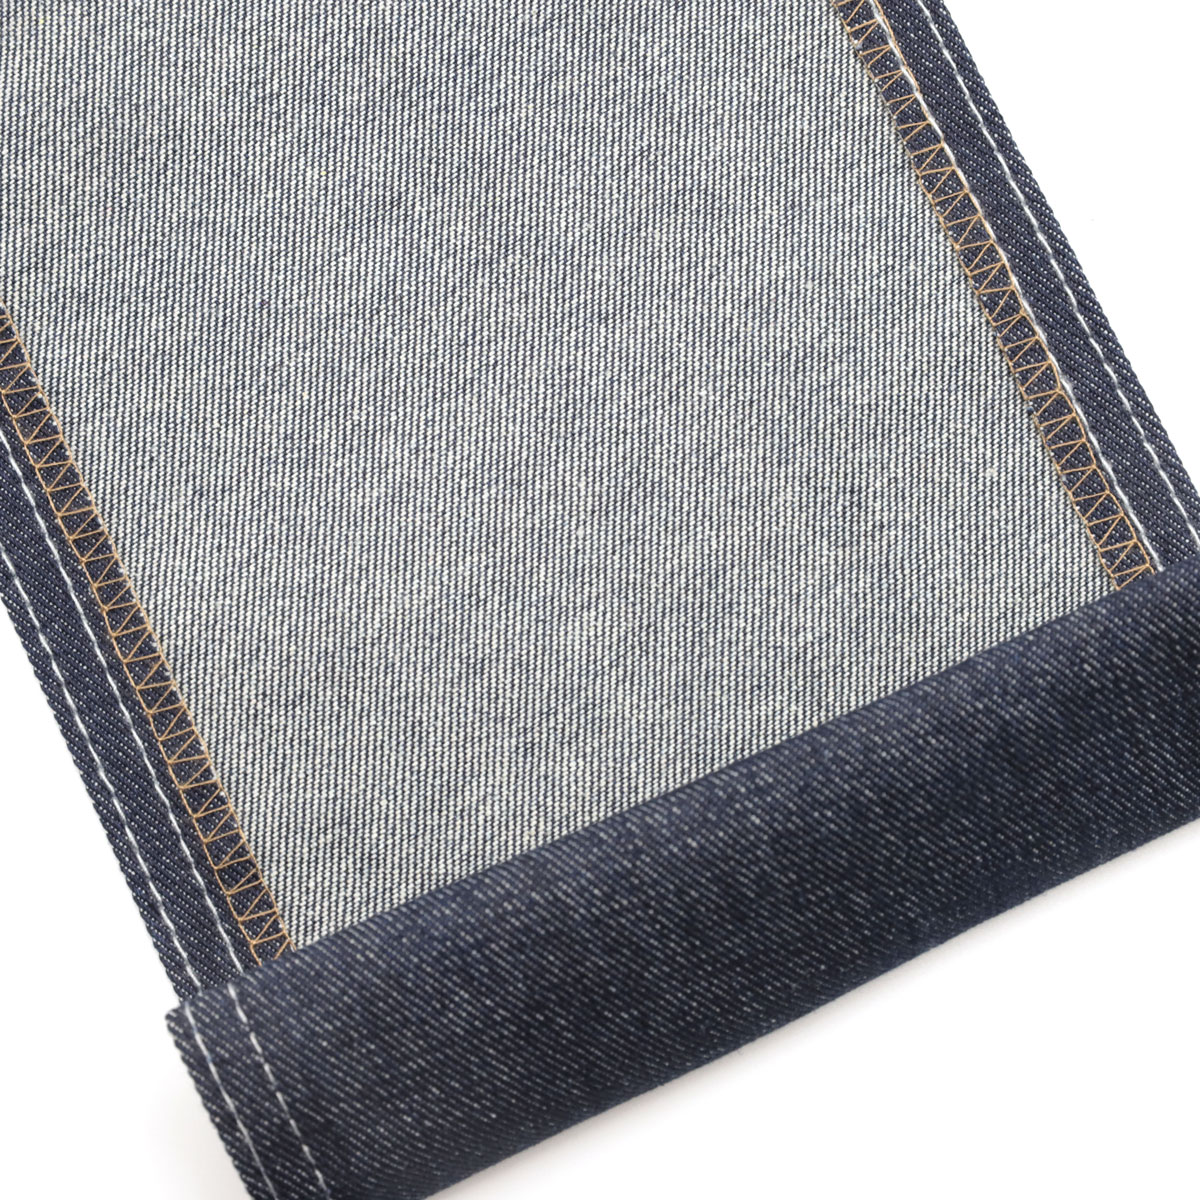 Good High Stretch Denim Fabric: Tips for Buying Good High Stretch Denim Fabric 1